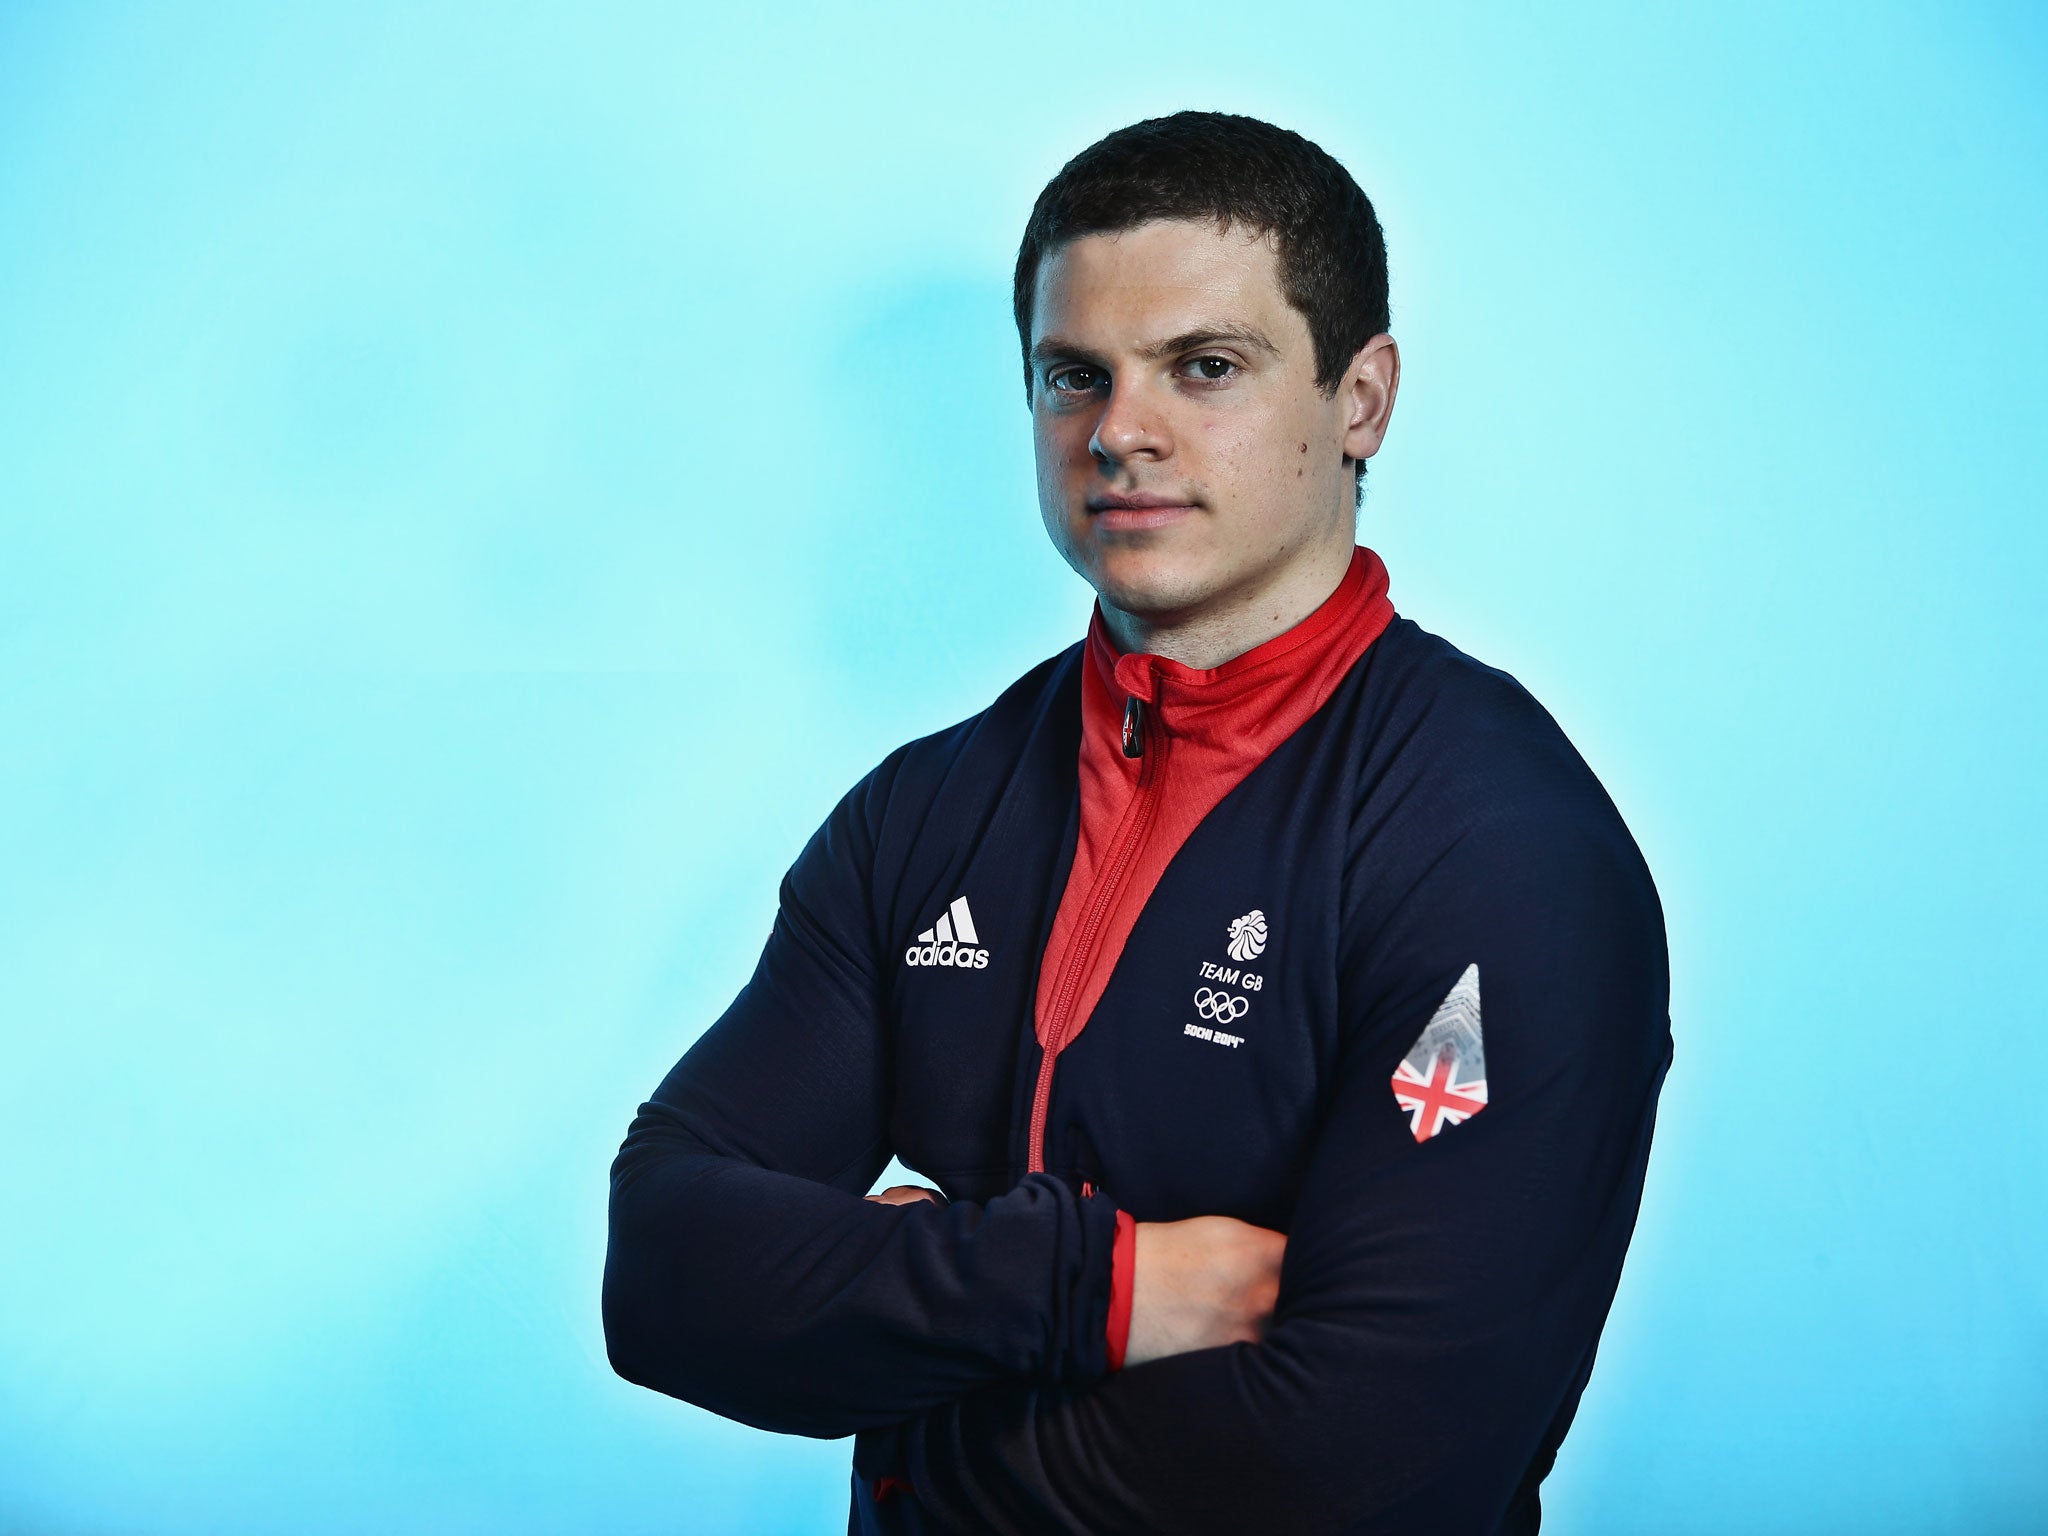 British bobsleigh athlete Craig Pickering has been ruled out of the 2014 Winter Olympics in Sochi after suffering a back injury